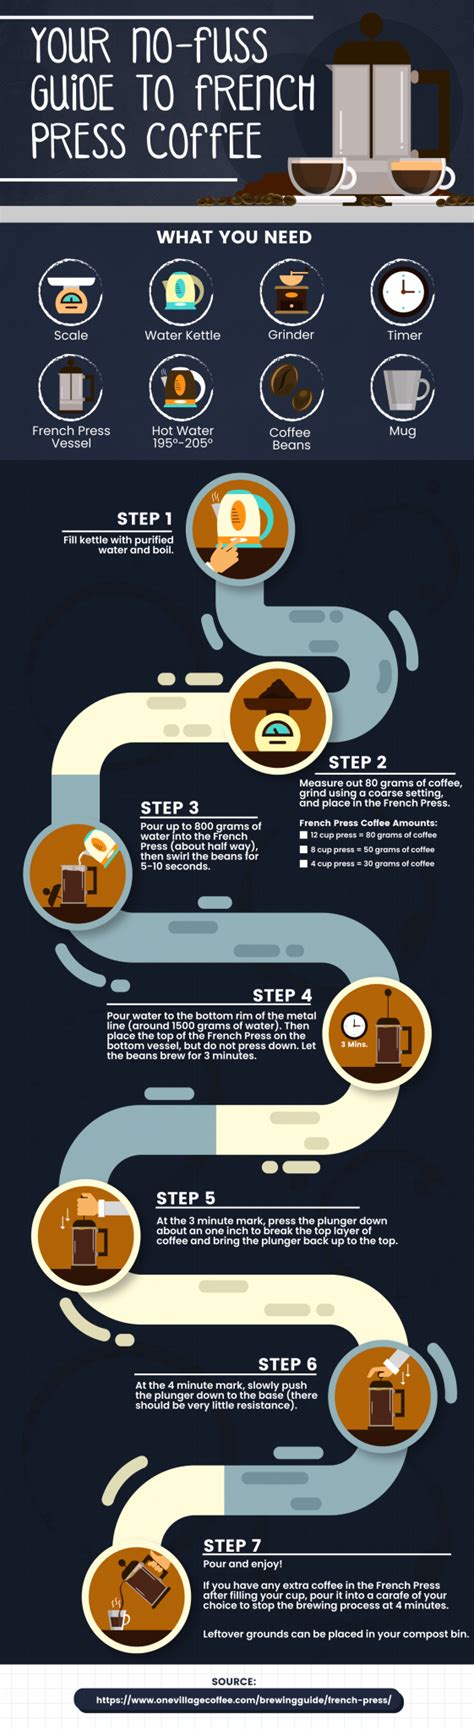 20 Process Infographic Templates To Help You Save Time